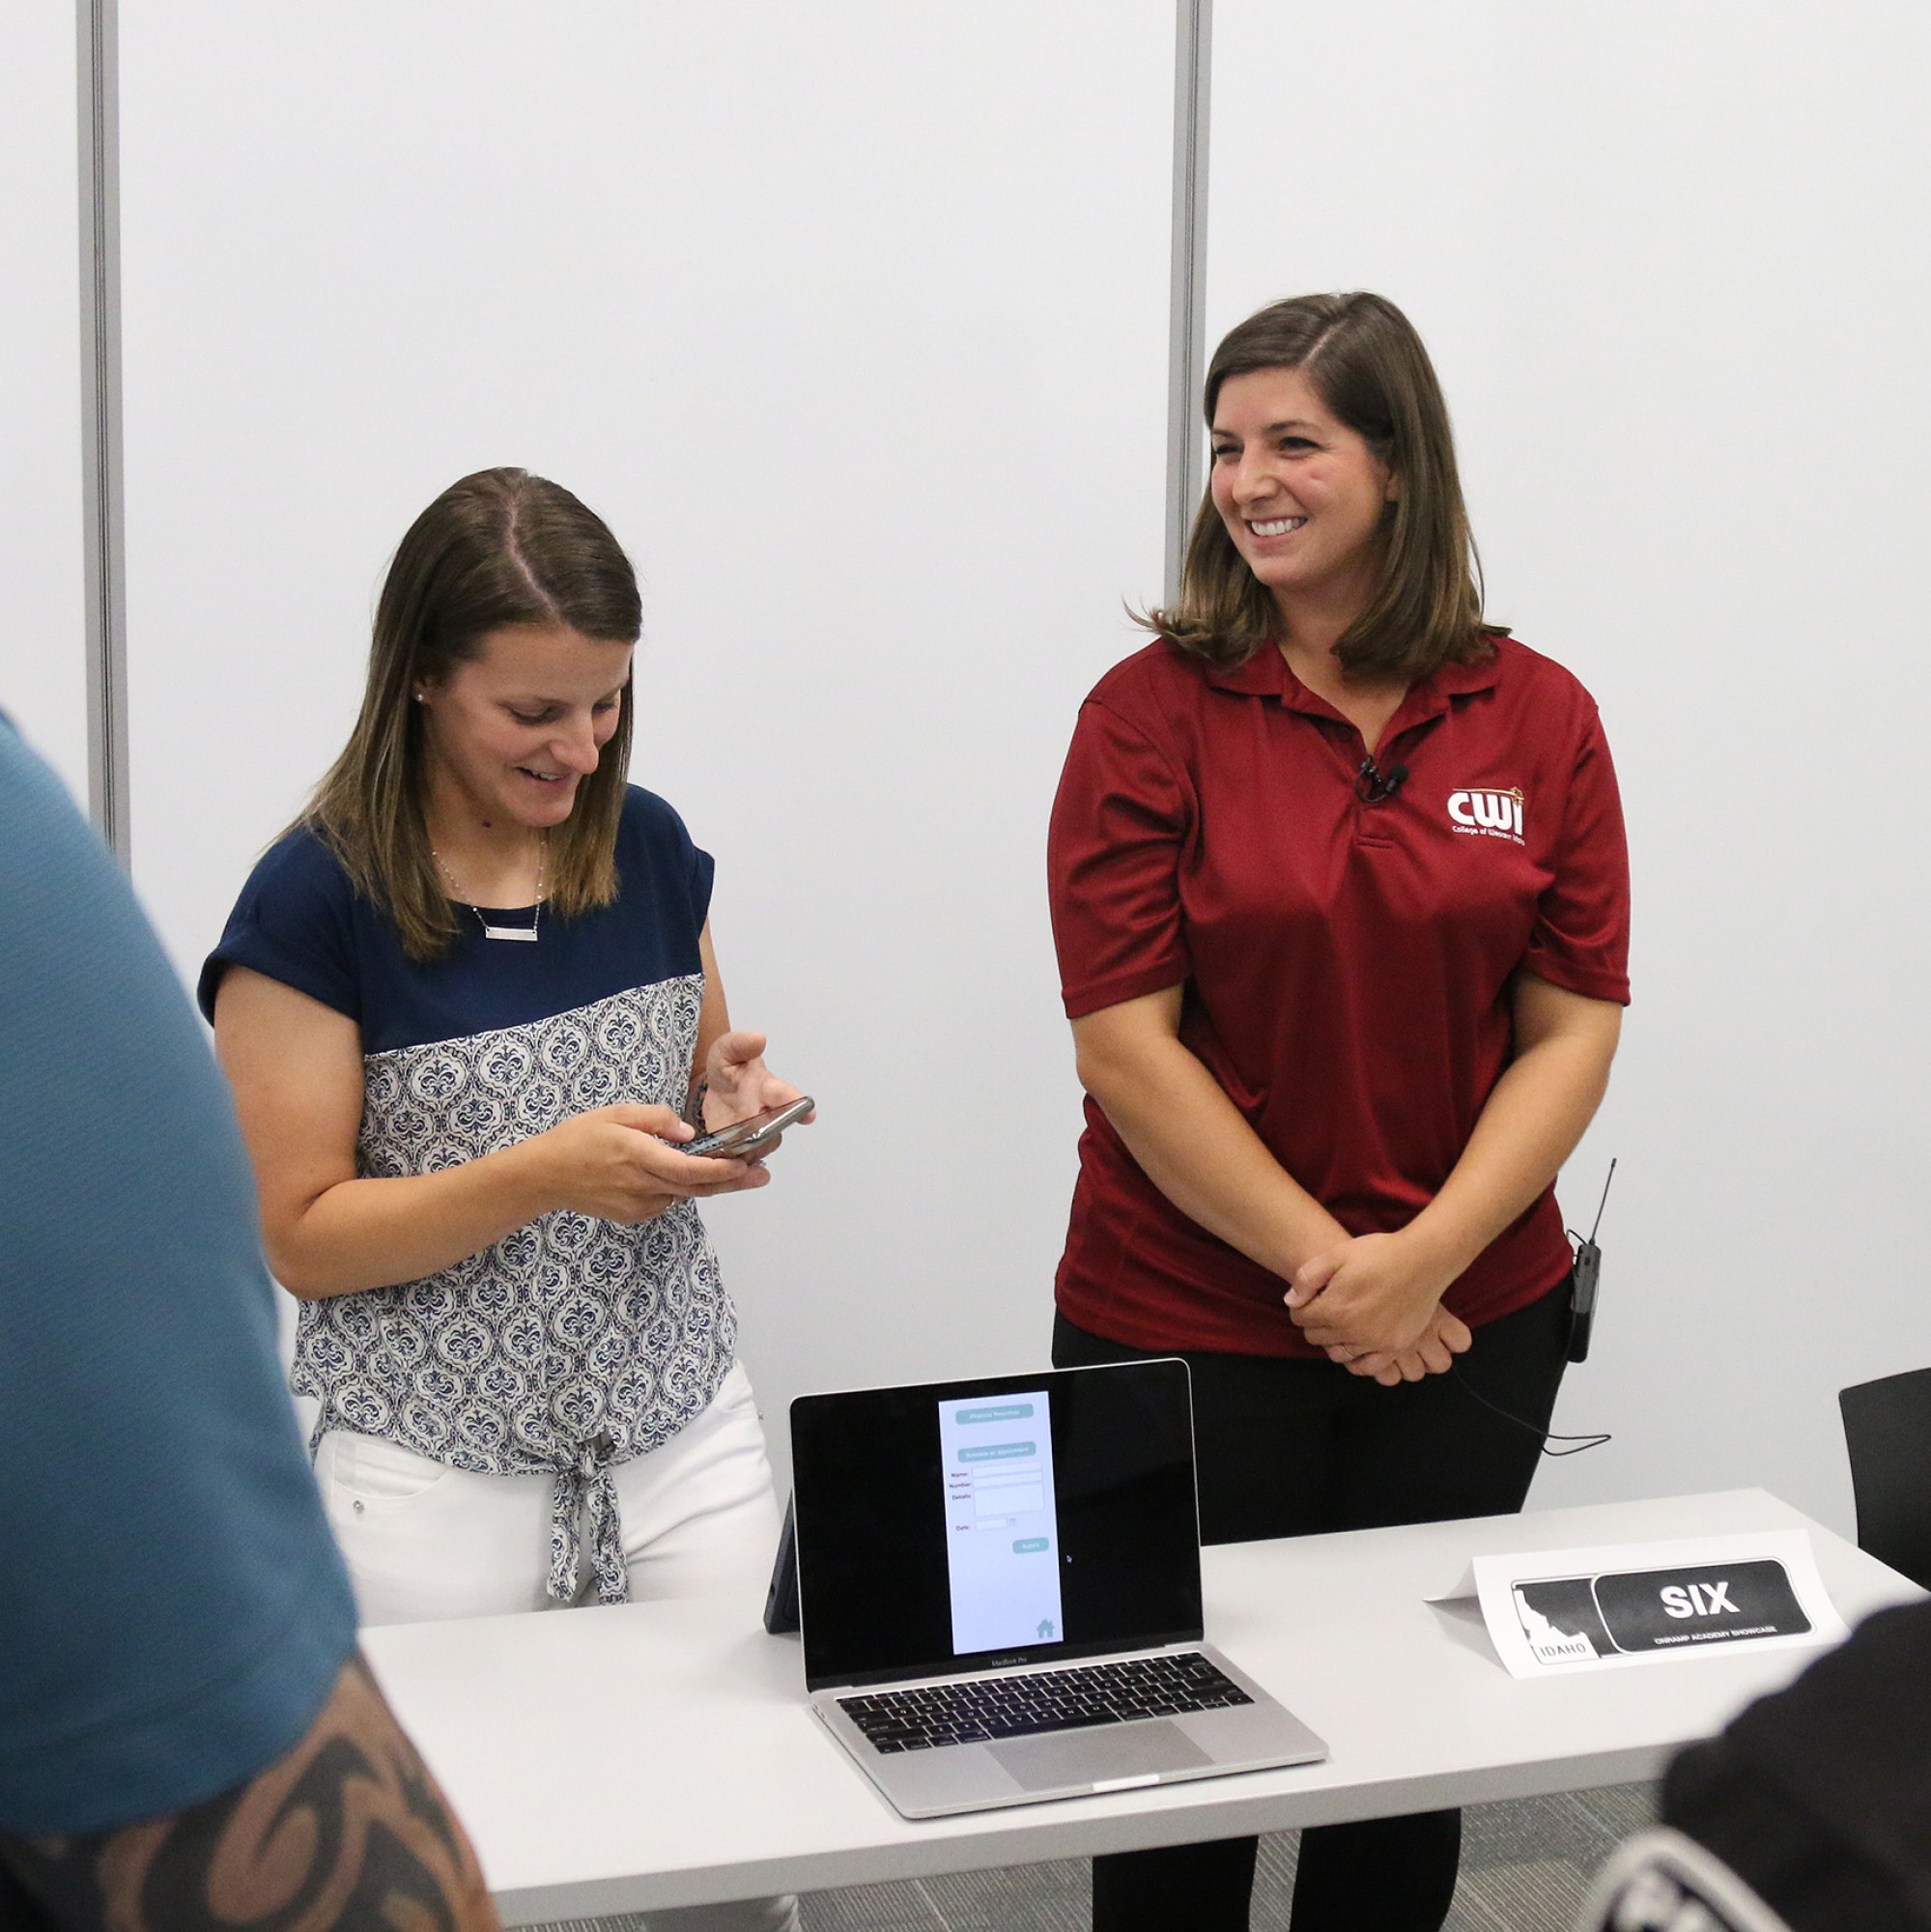 CWI's Sarah Strickley, right, participates in an Onramp event at the Idaho Digital Learning Alliance in 2019.